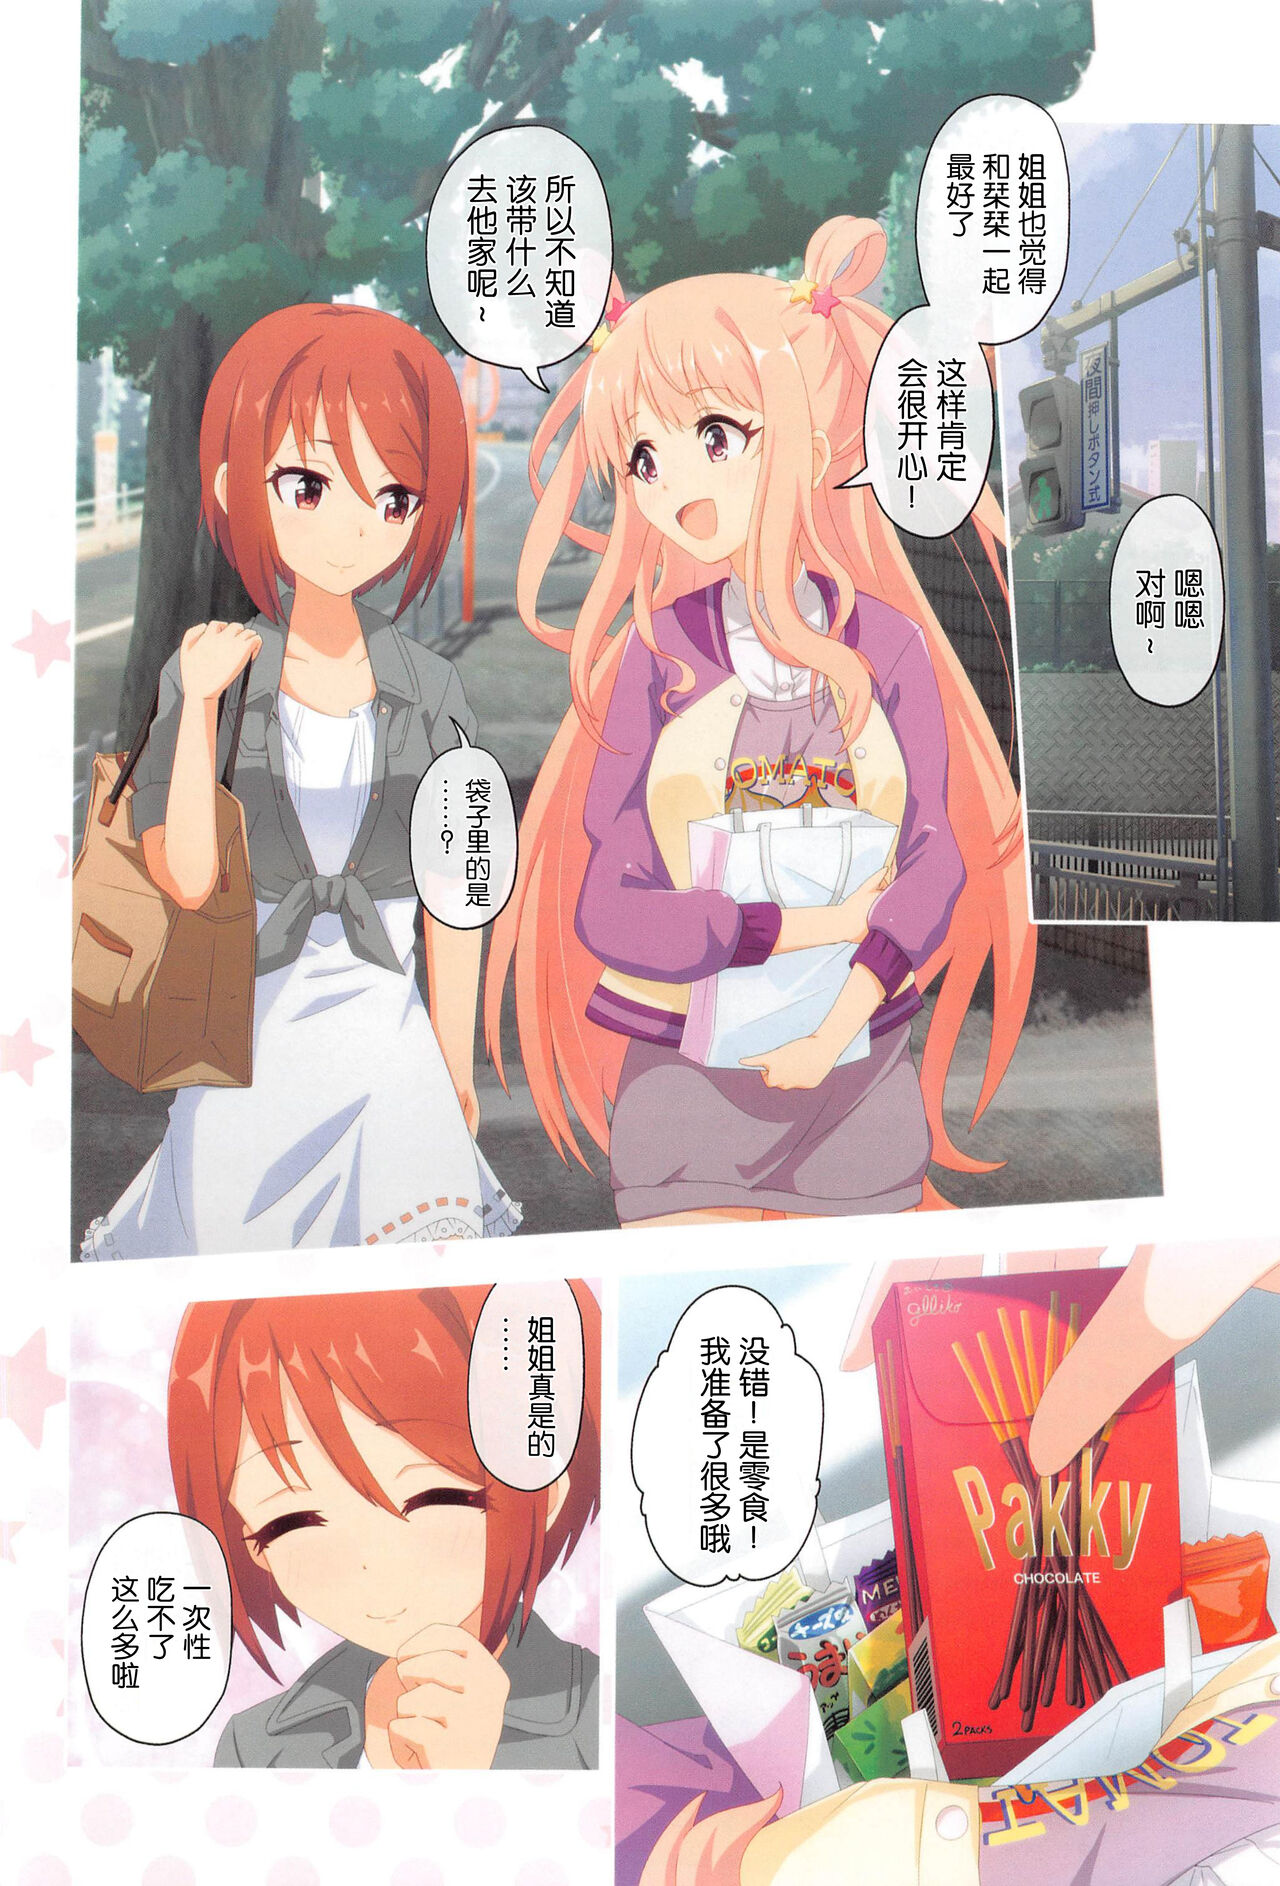 (COMIC1 BS-sai Special) [MIDDLY (Midorinocha)] Colorful Connect 5th:Dive (Princess Connect! Re:Dive) [Chinese] [黎欧x苍蓝星汉化组] (COMIC1 BS祭 スペシャル) [MIDDLY (みどりのちや)] カラフルコネクト 5th:Dive (プリンセスコネクト!Re:Dive) [中国翻訳]